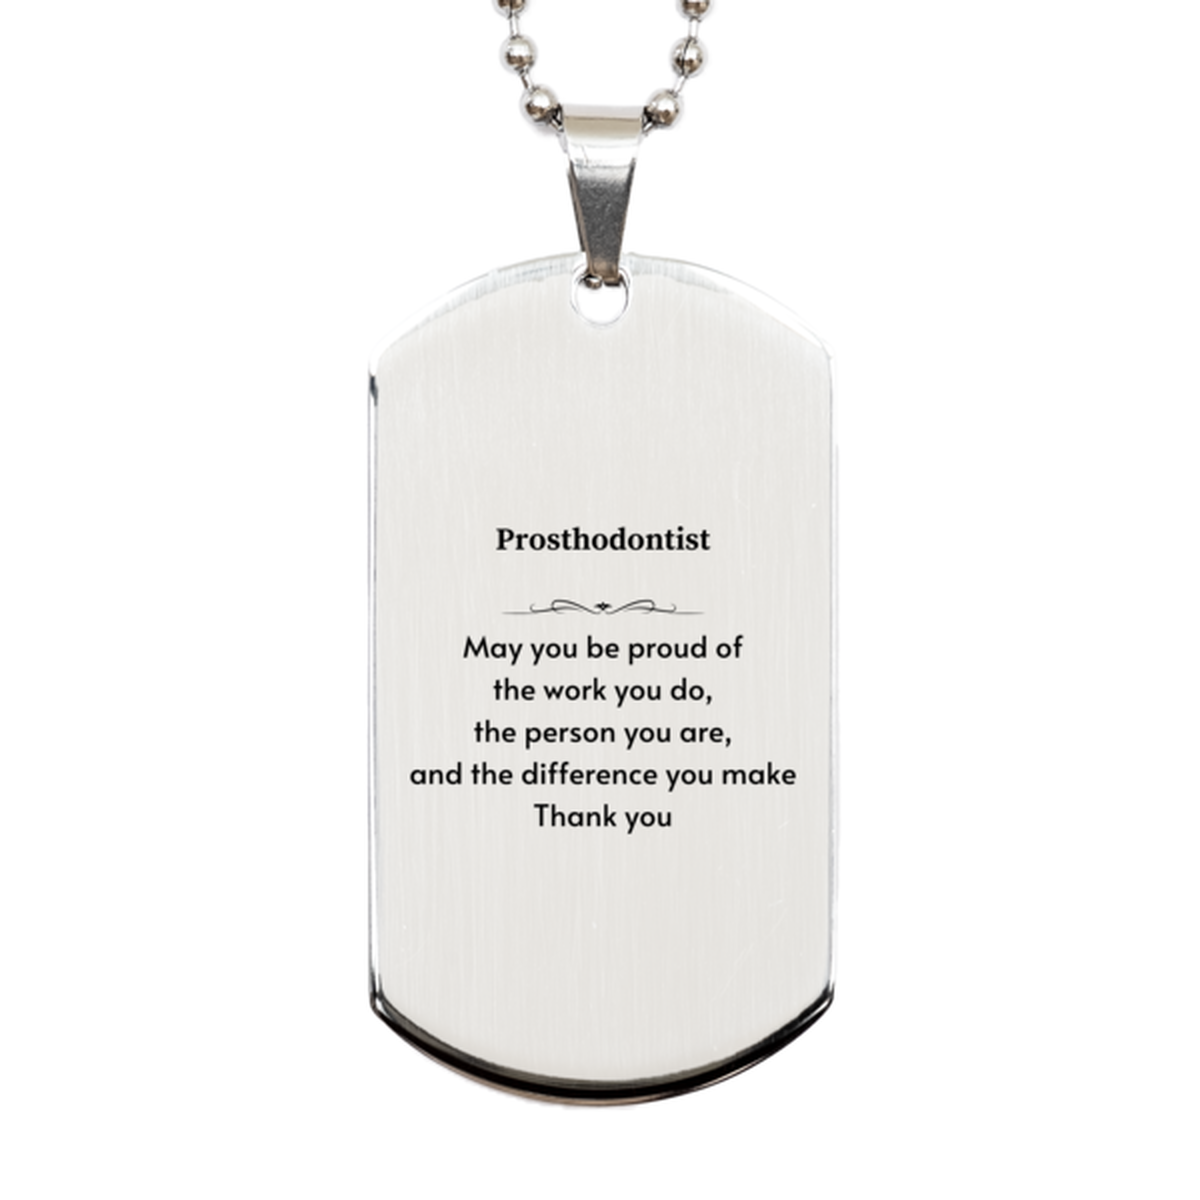 Heartwarming Silver Dog Tag Retirement Coworkers Gifts for Prosthodontist, Prosthodontist May You be proud of the work you do, the person you are Gifts for Boss Men Women Friends